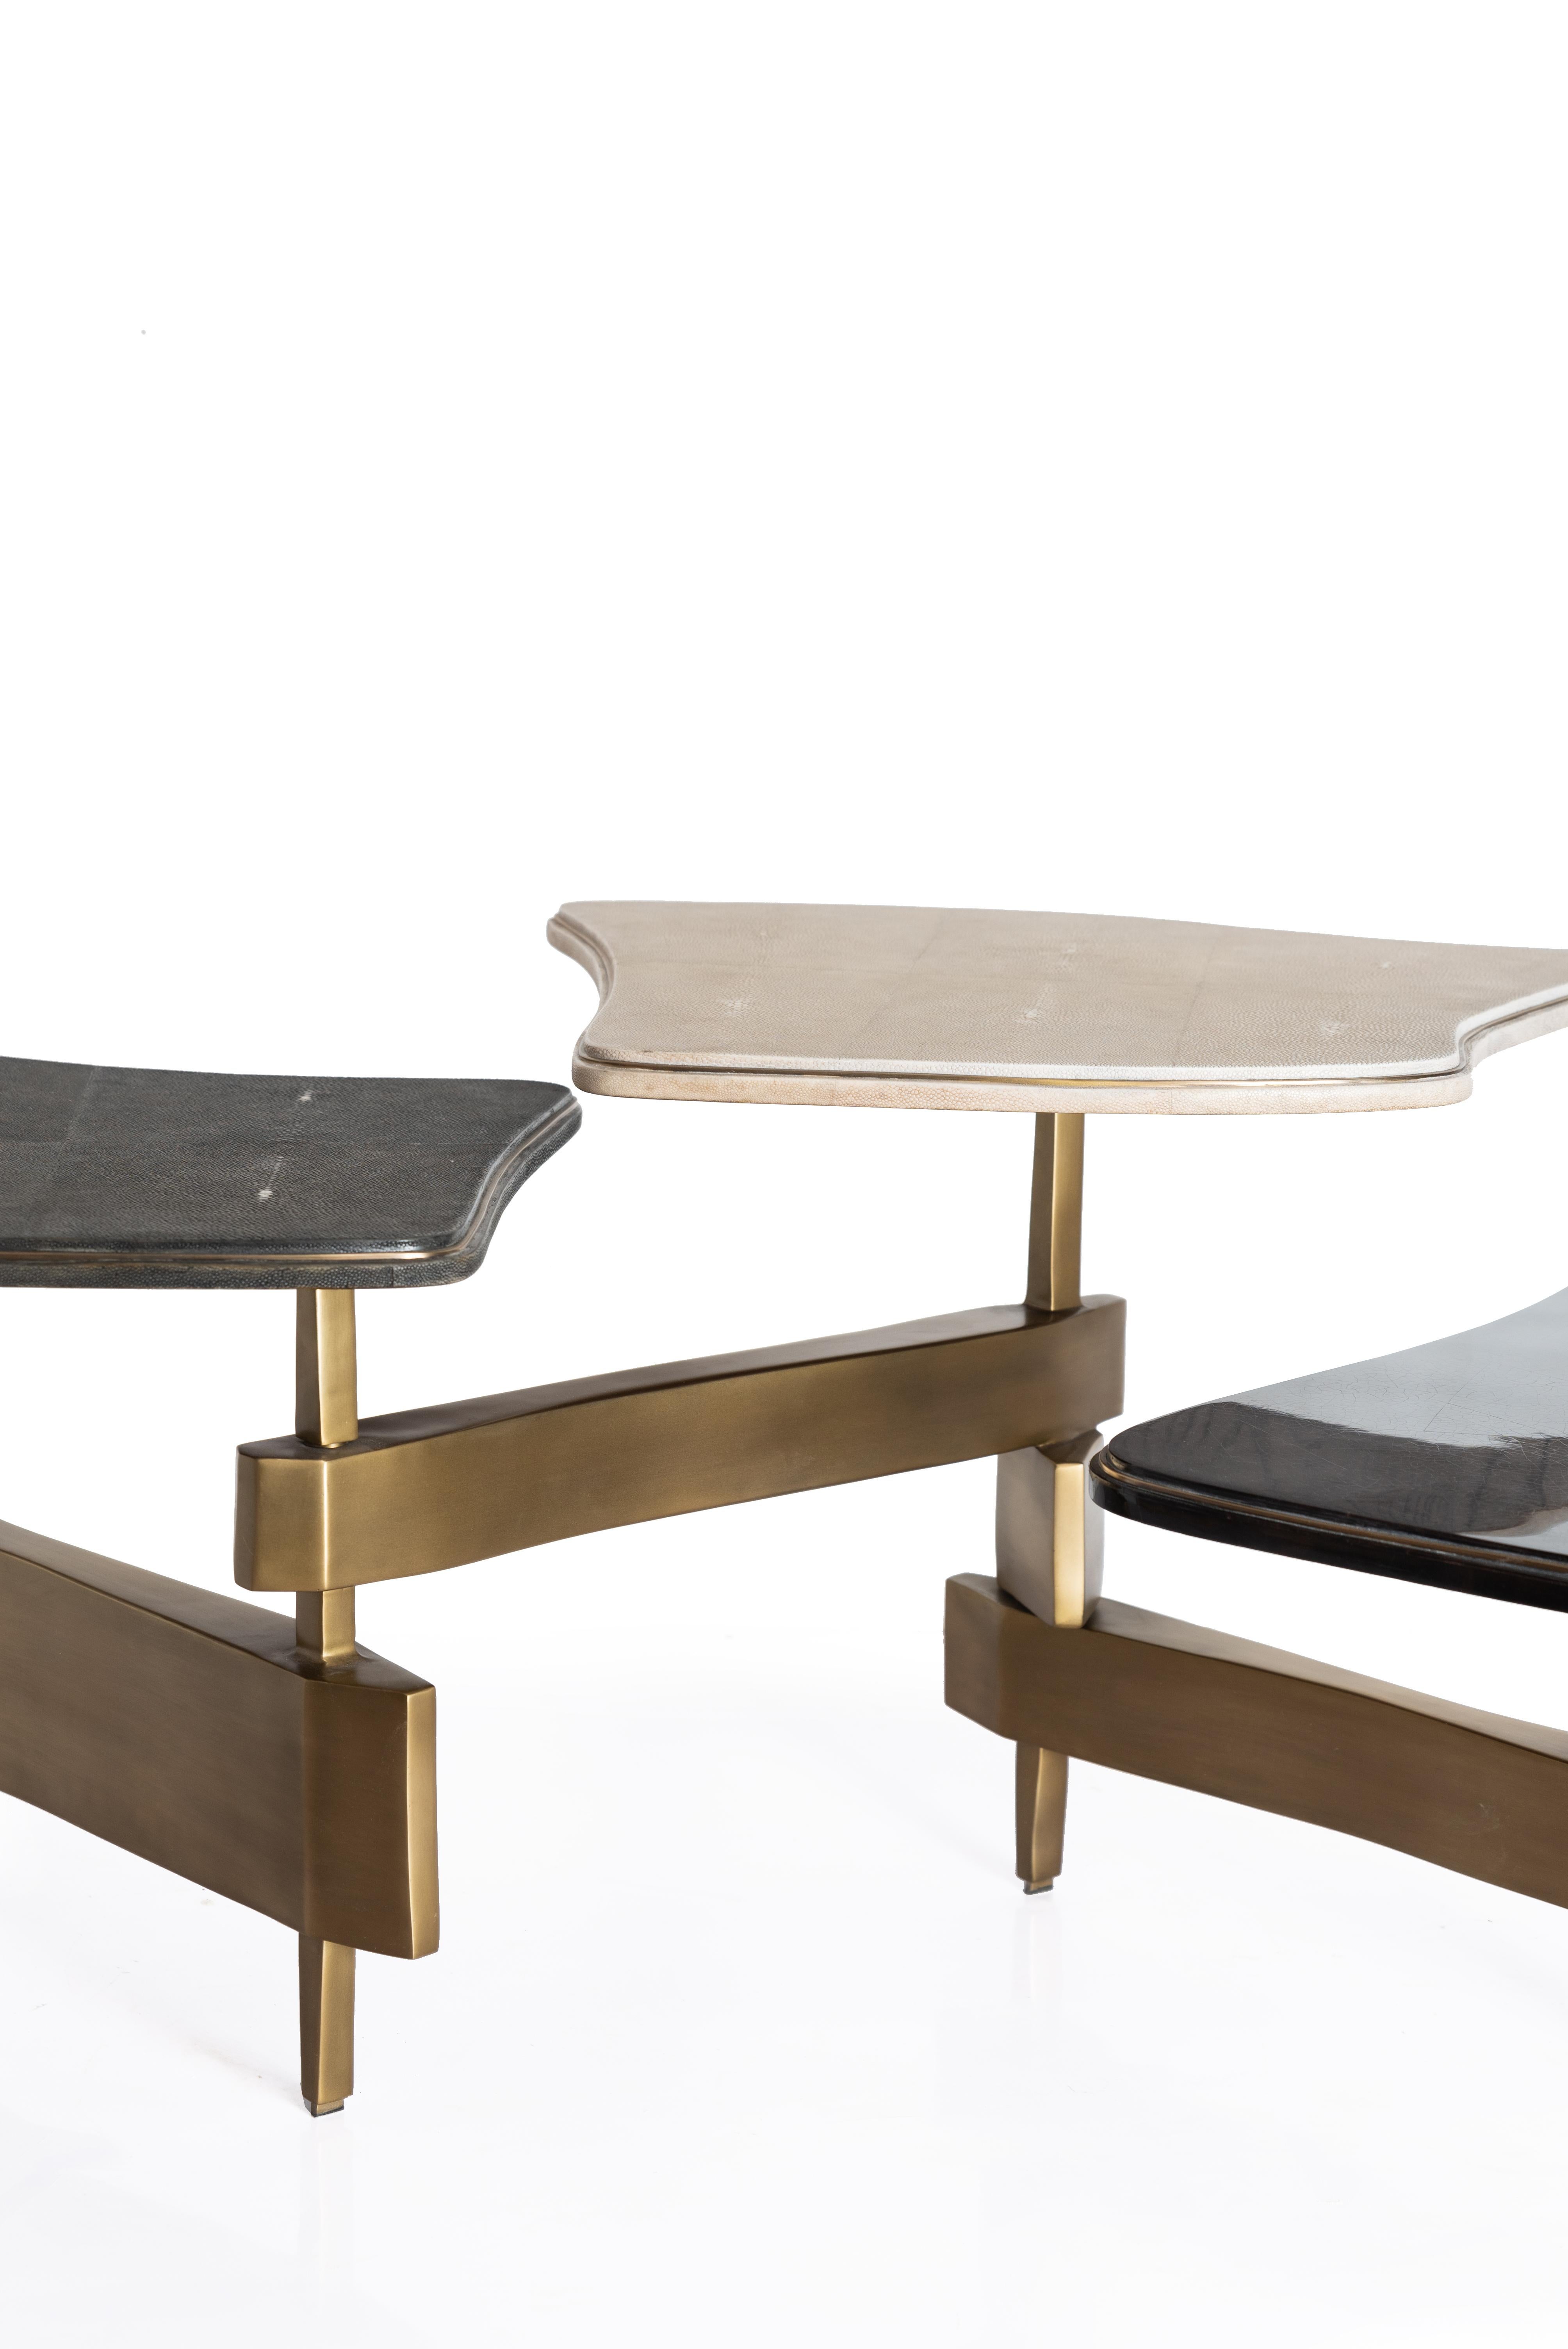 The Metropolis 3-top coffee table by Kifu Paris is a dramatic and sculptural design that demonstrates the incredible and signature artisanale work from her Augousti genes. The bronze-patina brass base of the coffee table is conceptually inspired by